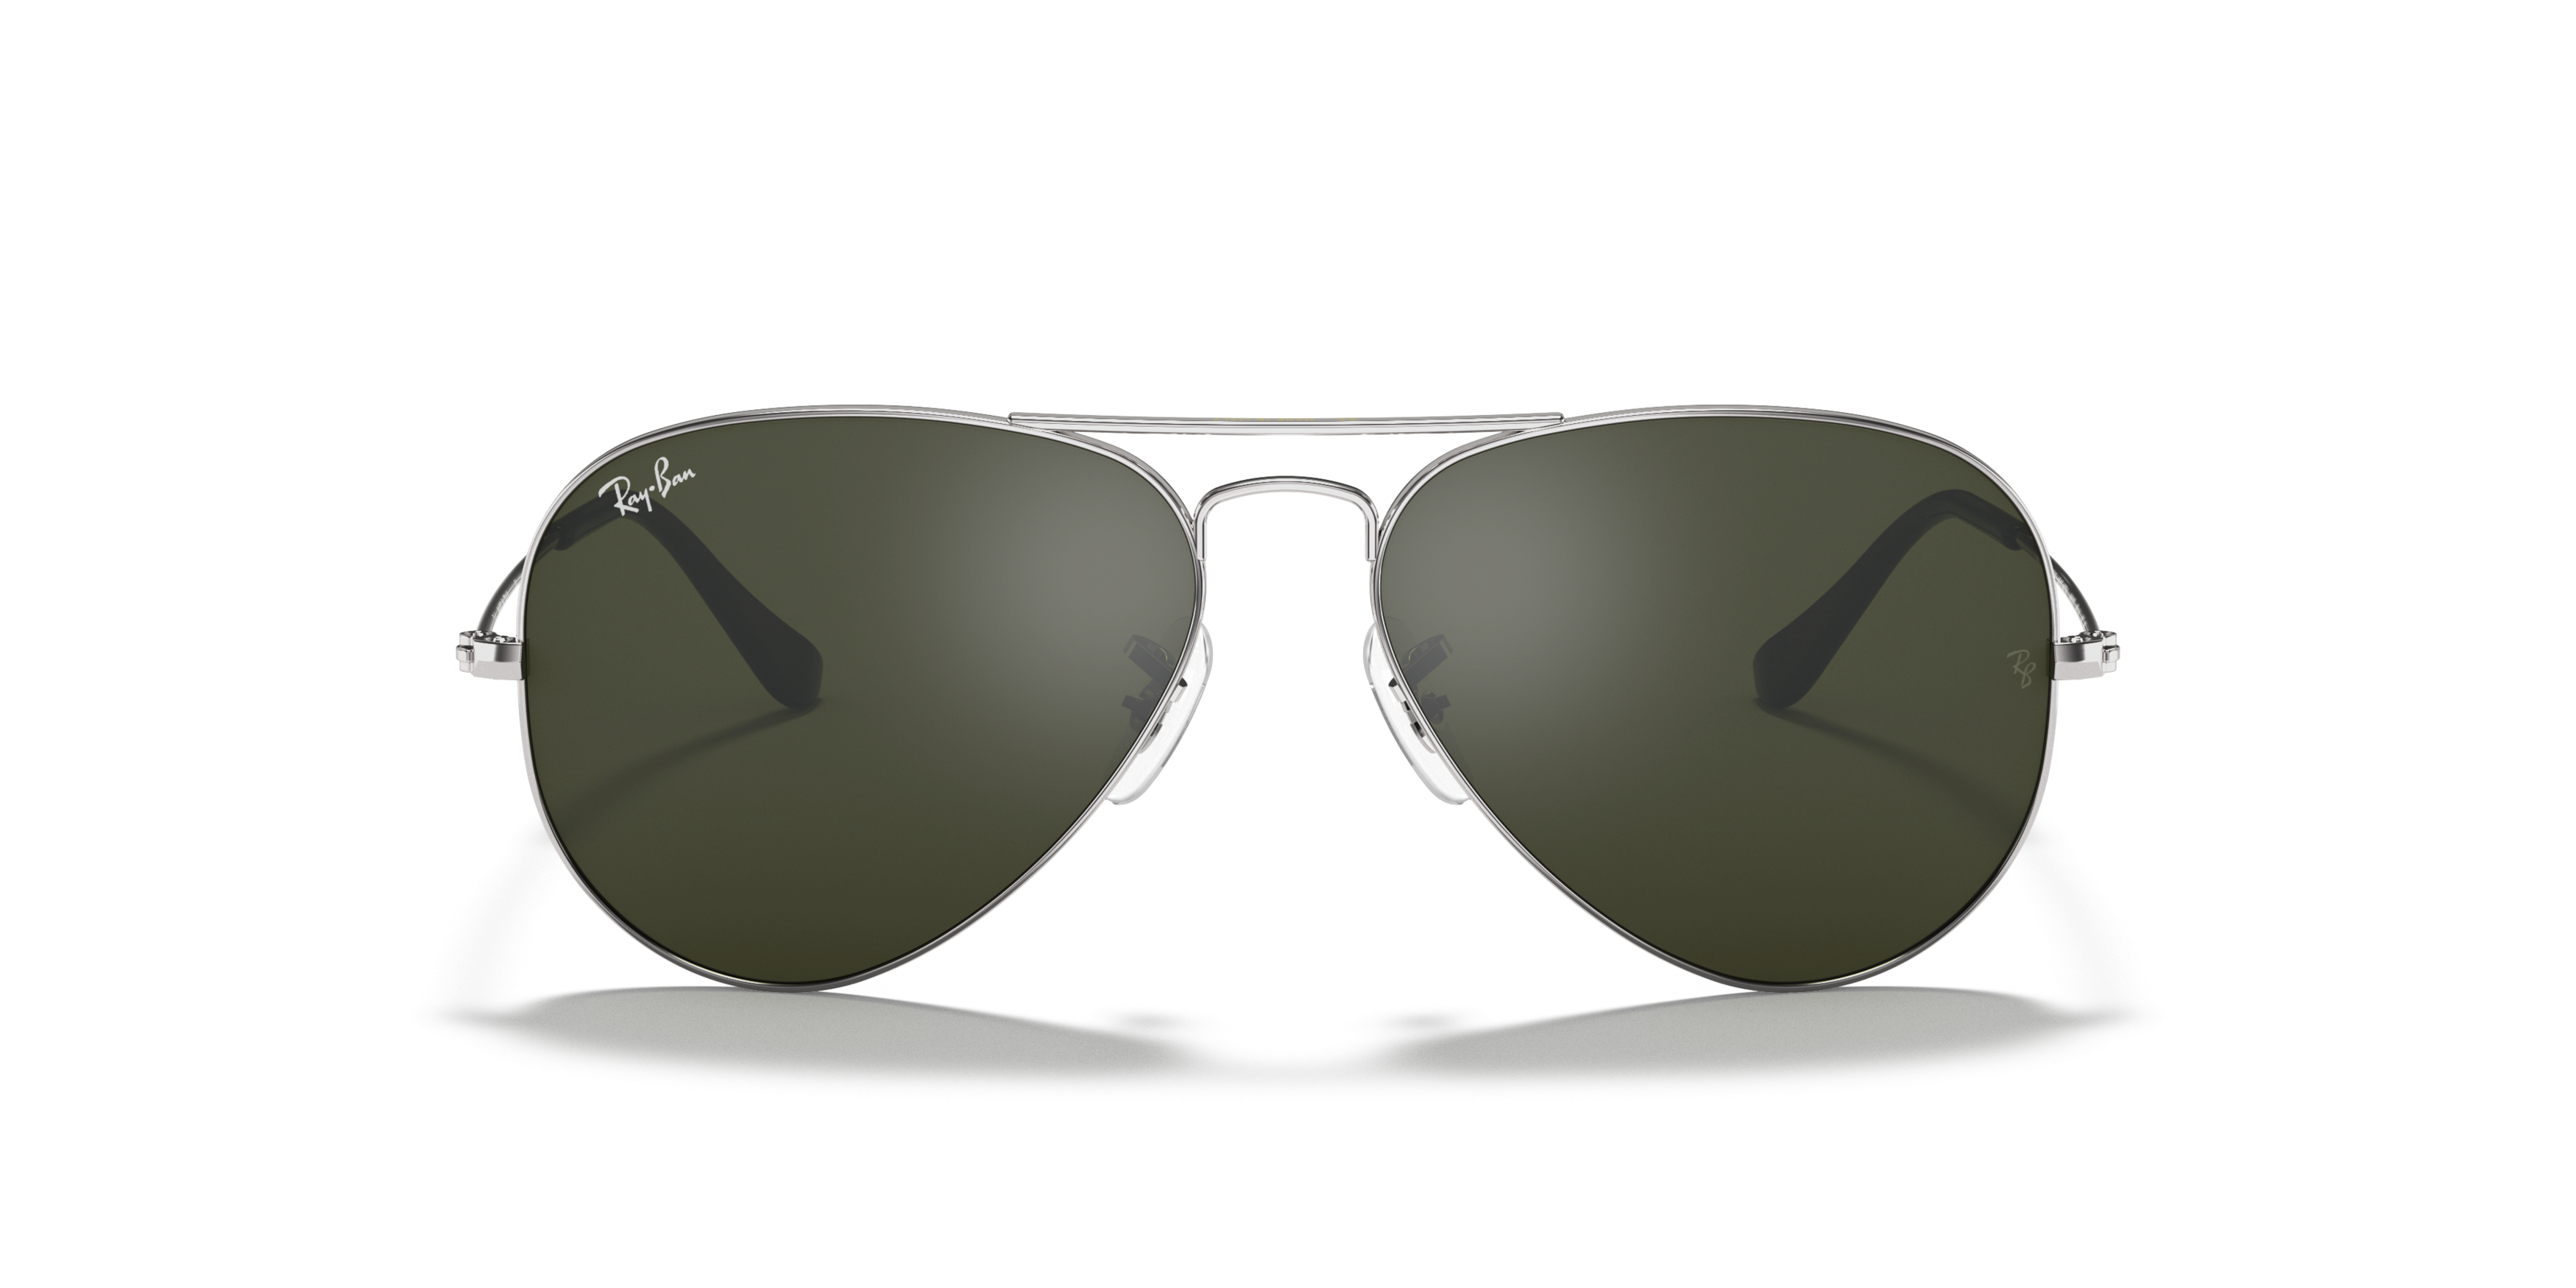 [products.image.front] RAY-BAN RB3025 W3277